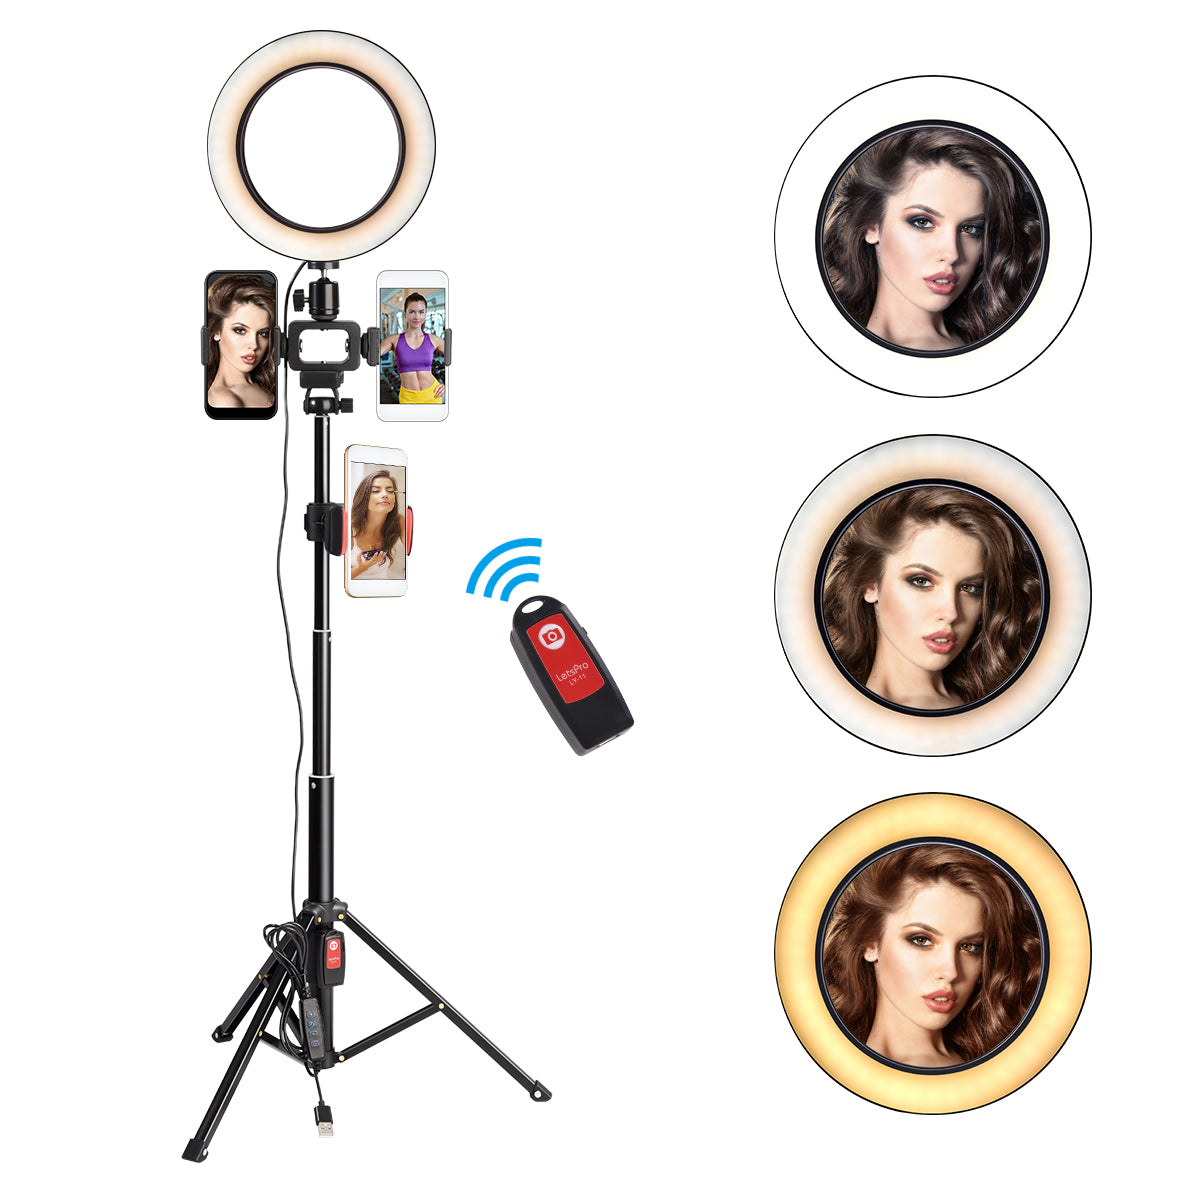 3 Colors LED Ring Light with Tripod Stand Phone Holder Remote Control Adjustable Height Multi USB Charging Cable